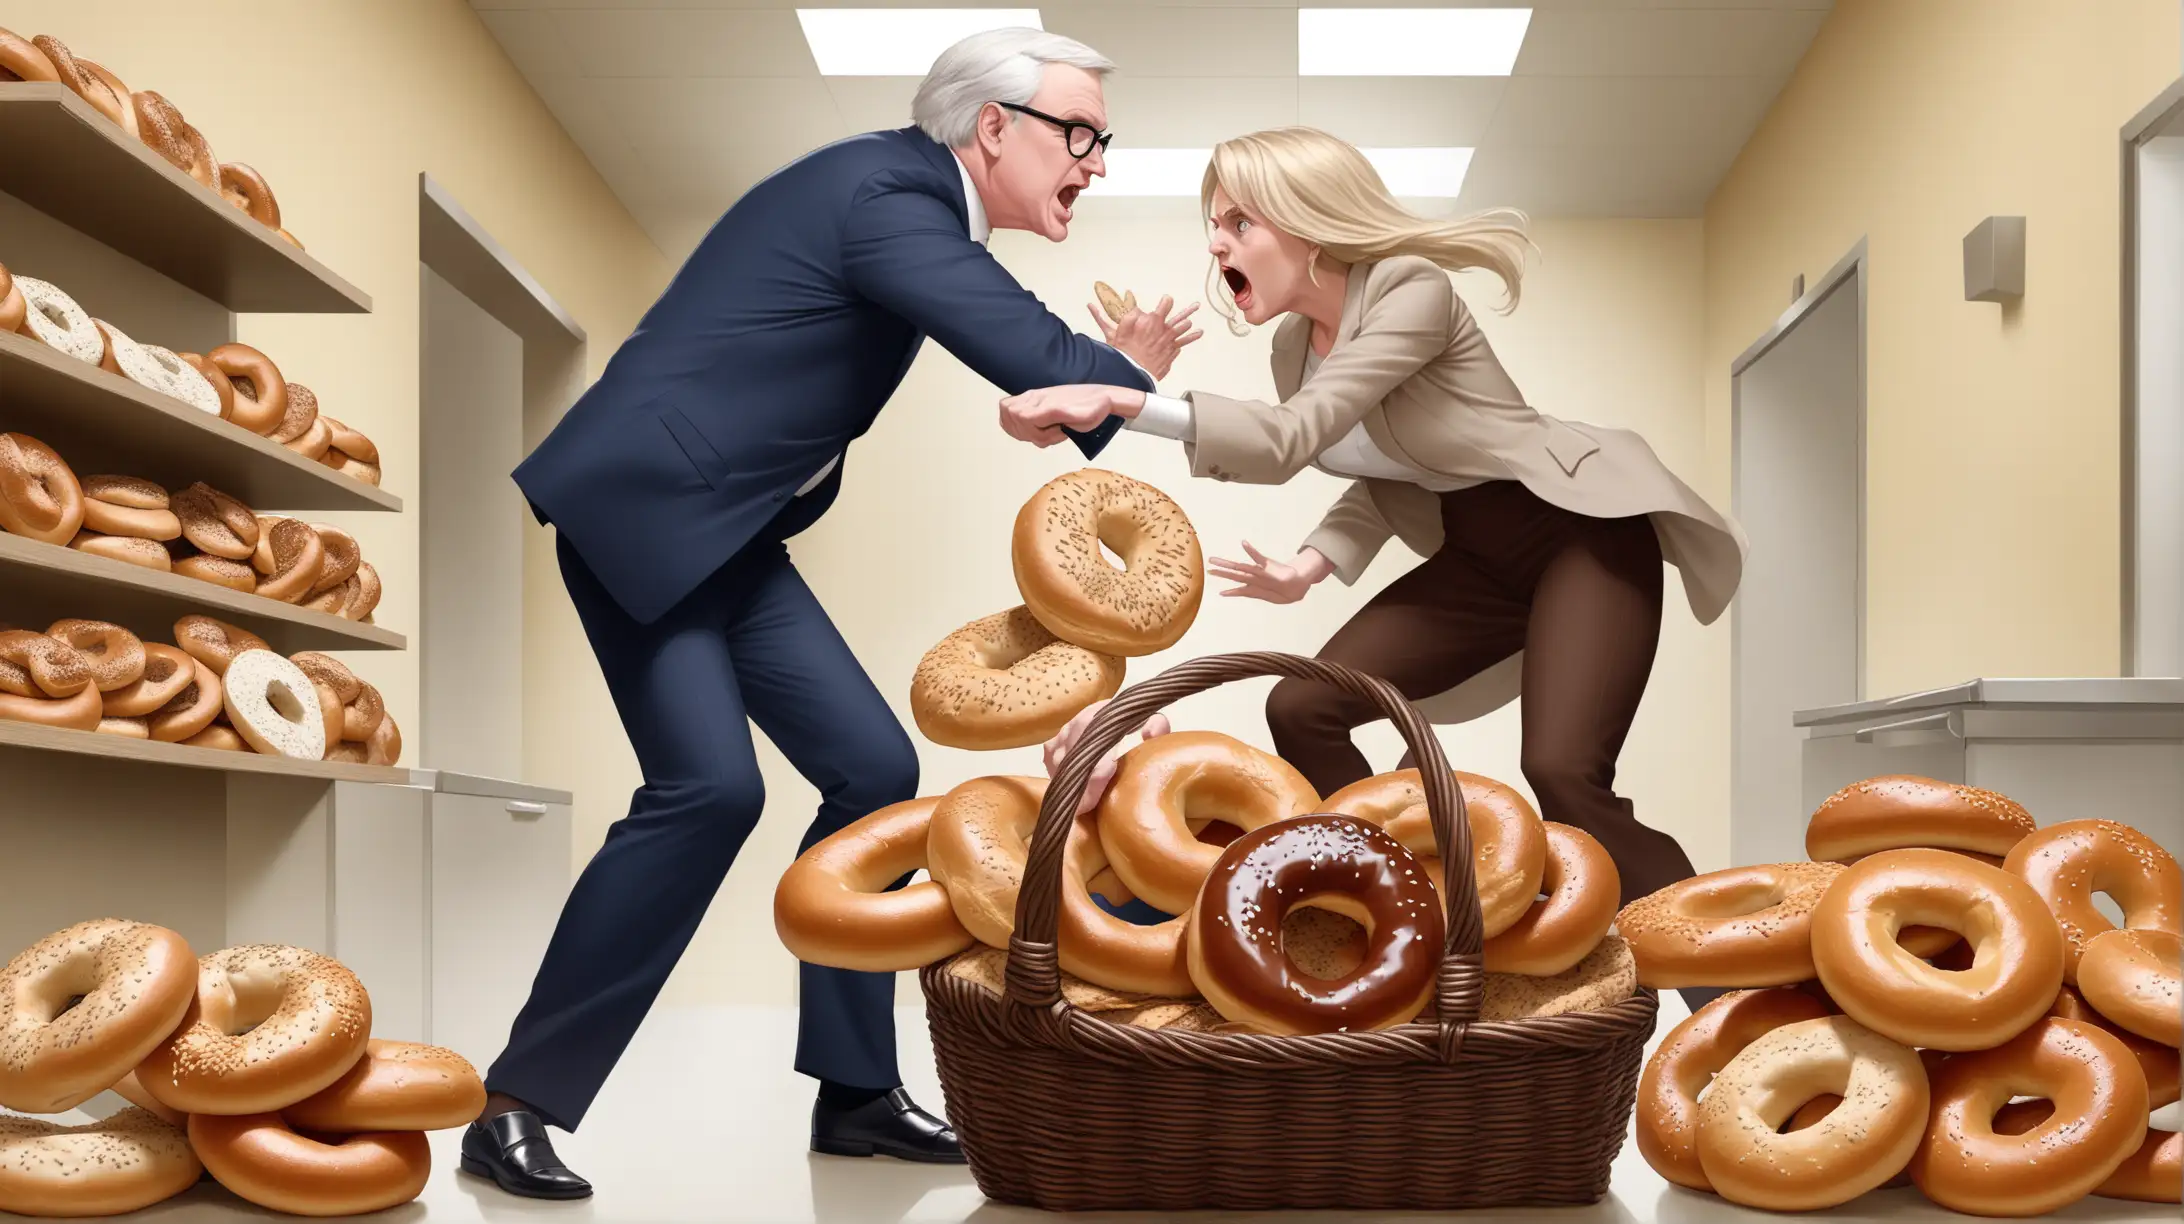 Class Clash Wealthy Man and WorkingClass Woman Battle over Bagels and Matza